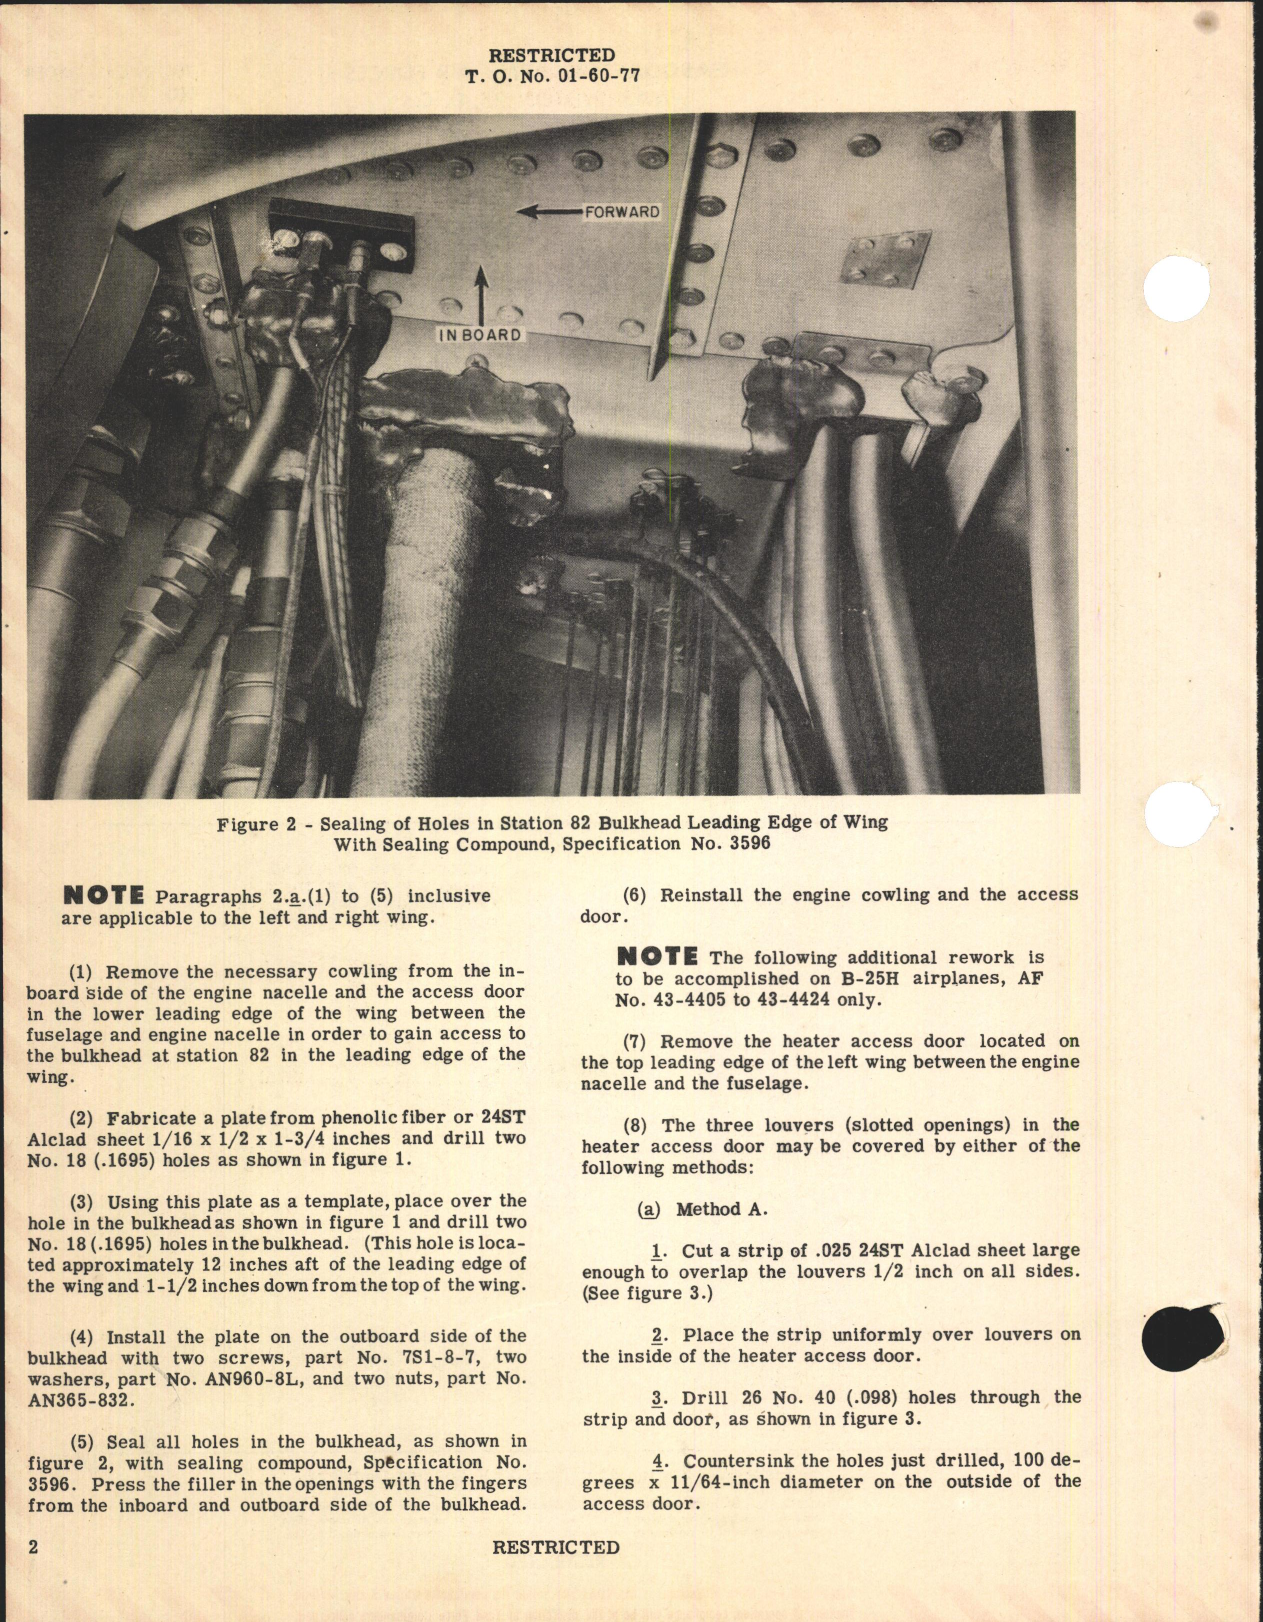 Sample page 2 from AirCorps Library document: Sealing Wing Station 82 Bulkhead for B-25